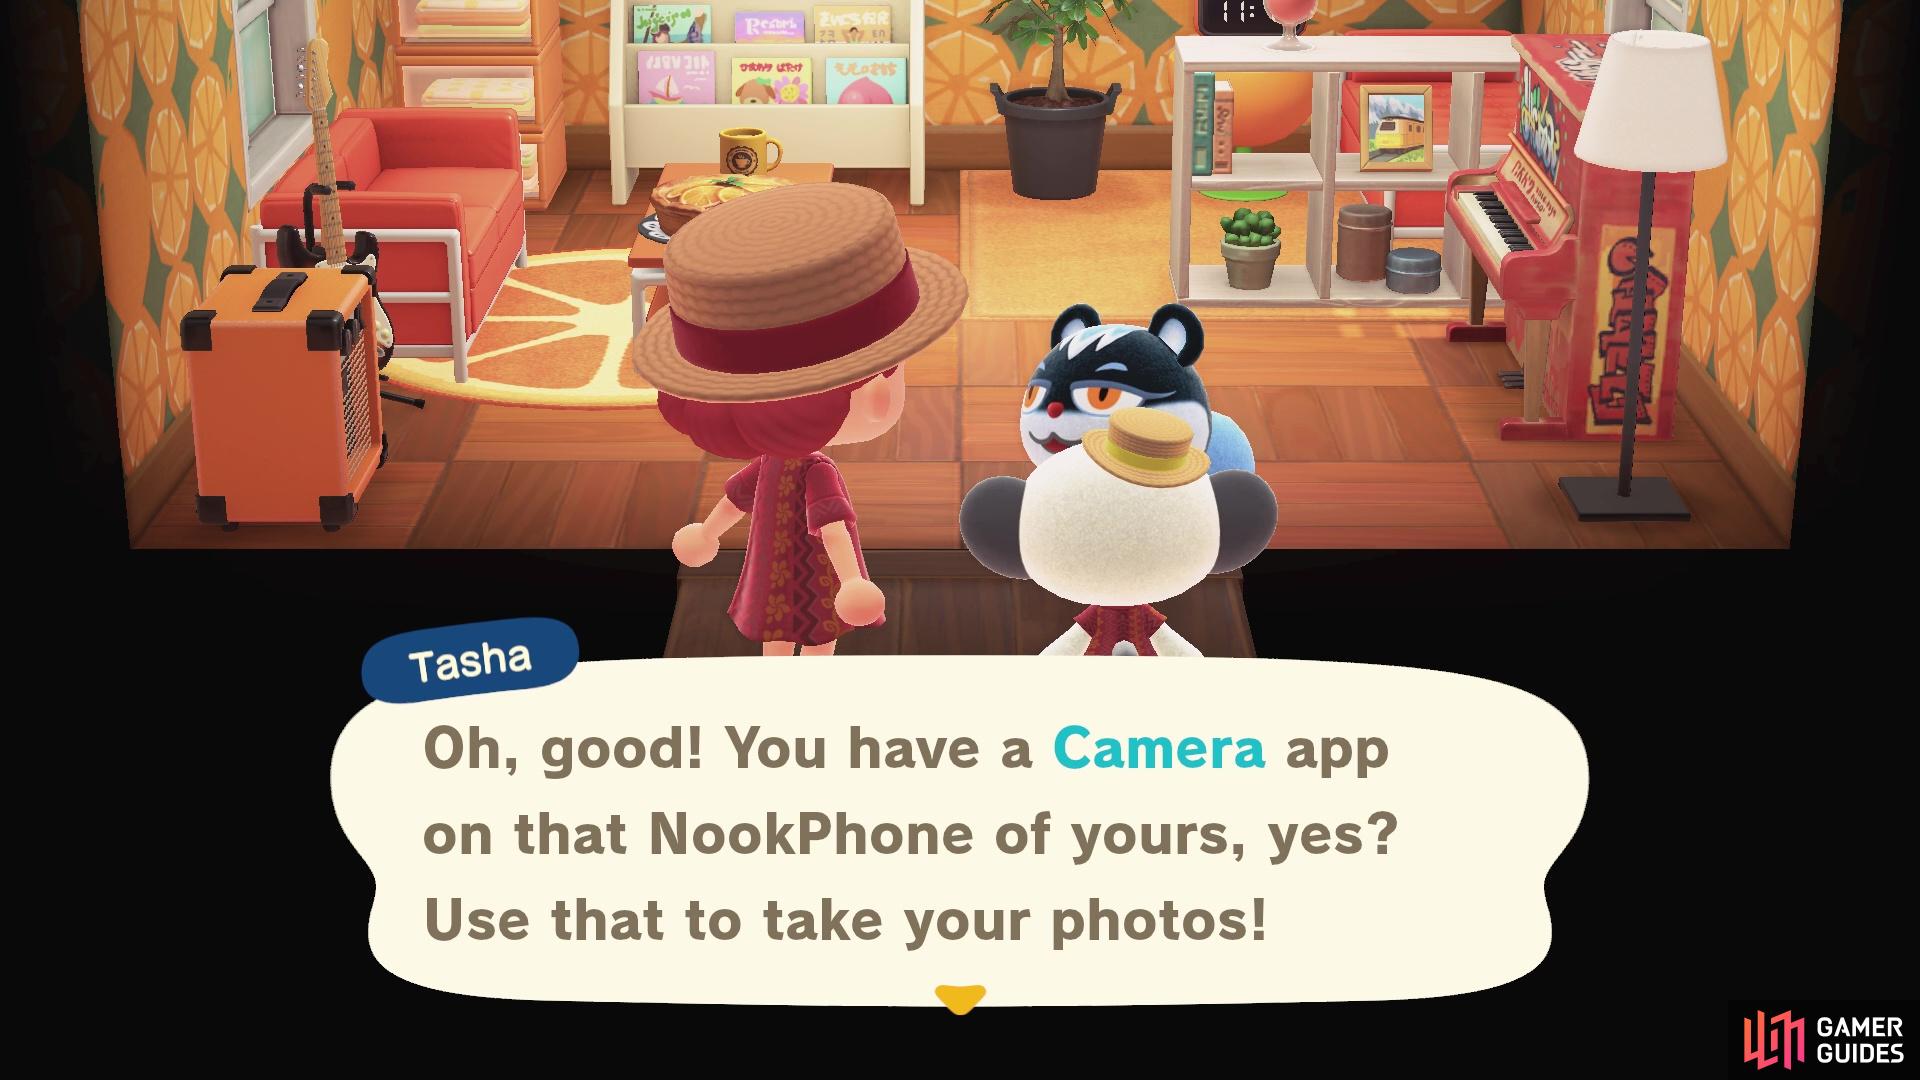 Use your camera to take photos of the vacation home. 